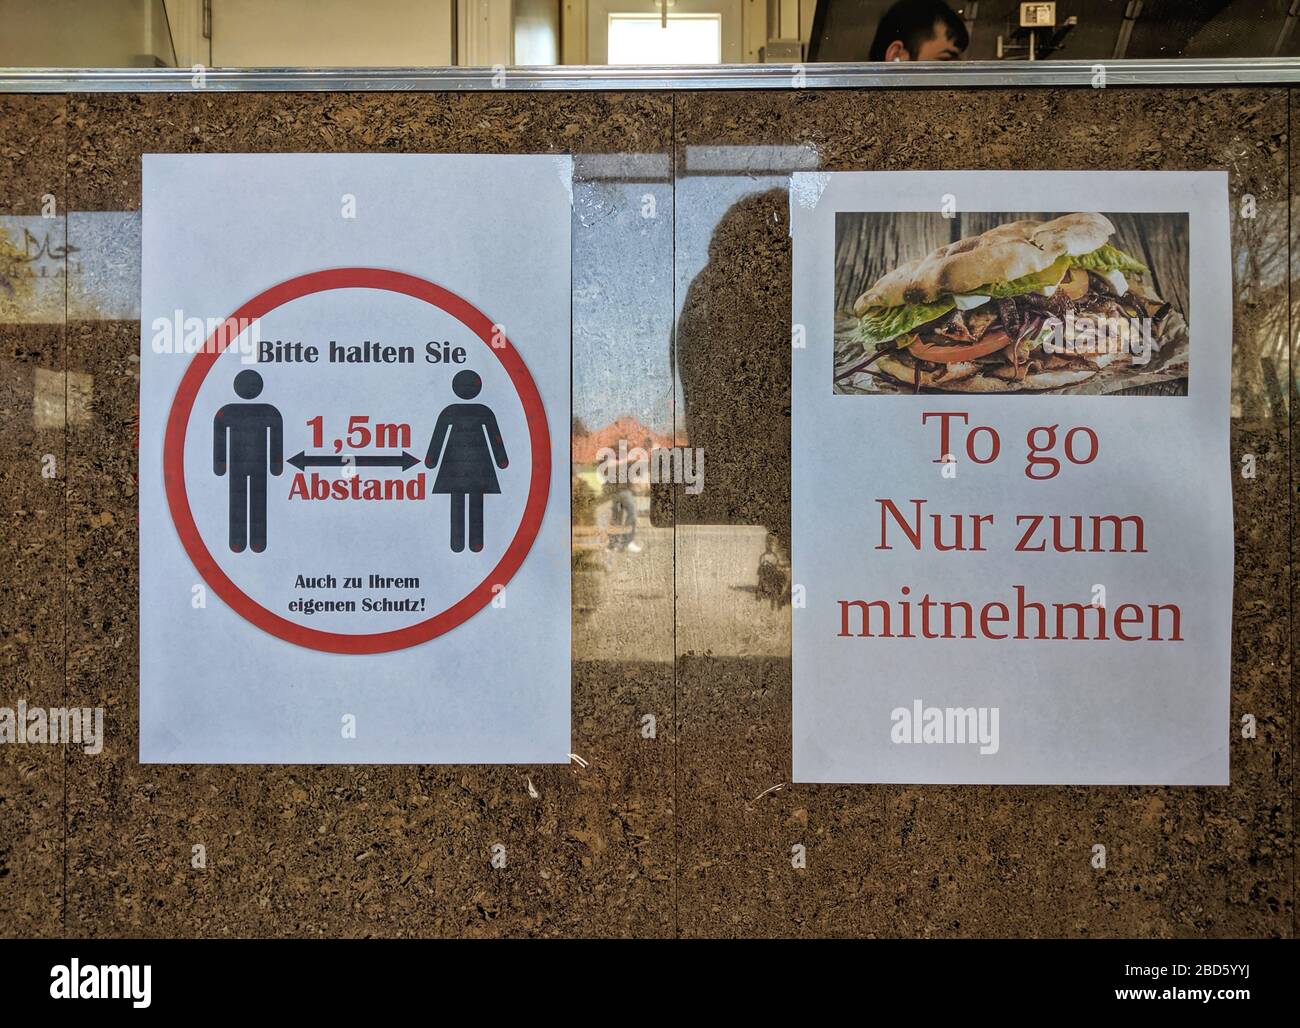 Munich, Germany. 07th Apr, 2020. A sign in a Doener Kebab restaurant in Munich, Germany where 1.5m distances are enforced and orders are to go only. Credit: ZUMA Press, Inc./Alamy Live News Stock Photo